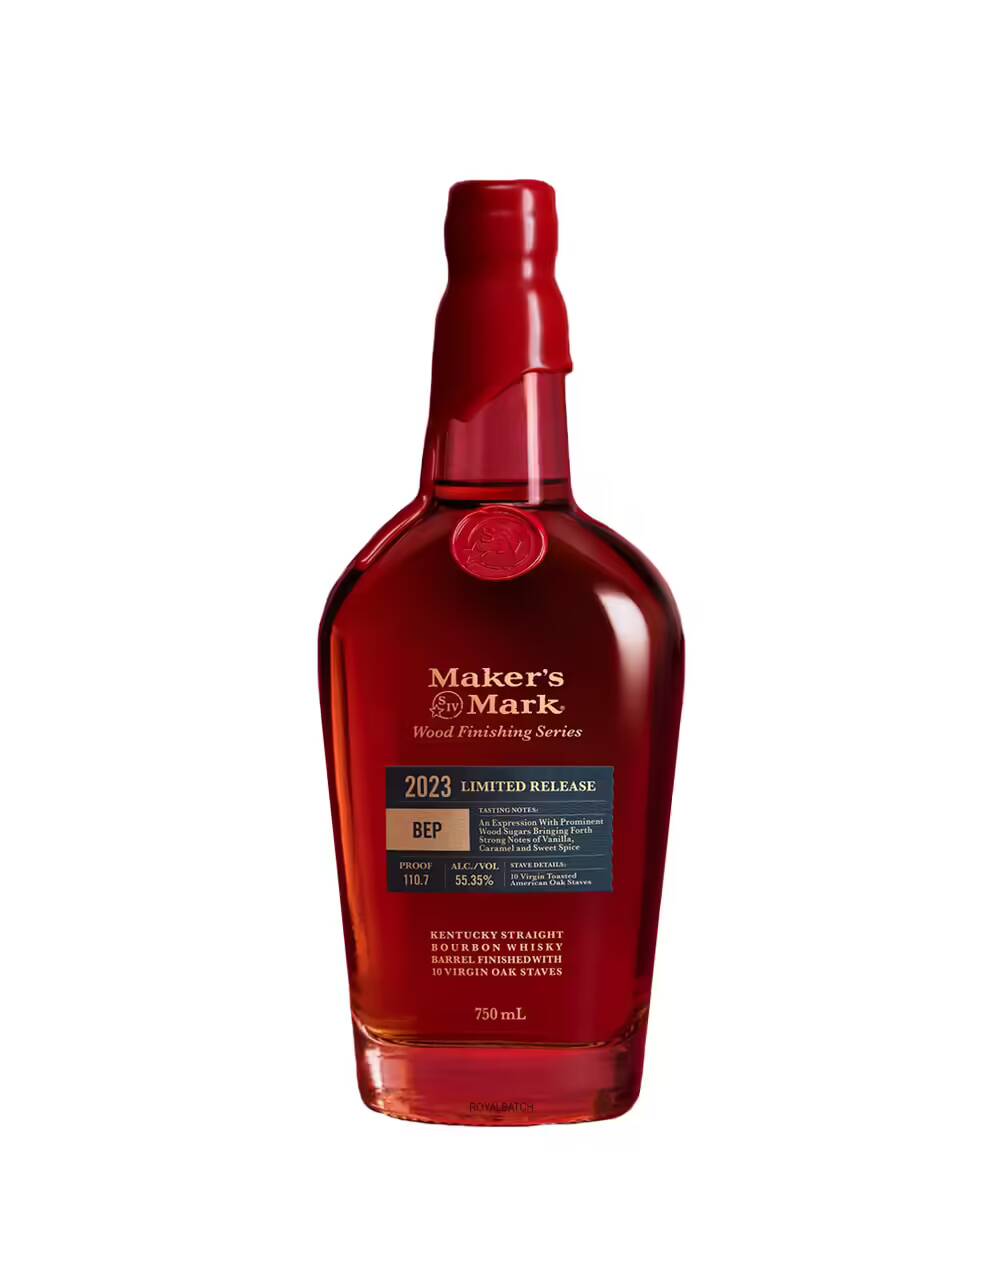 Makers Mark Limited Release 2023 BEP Kentucky Straight Bourbon Whiskey